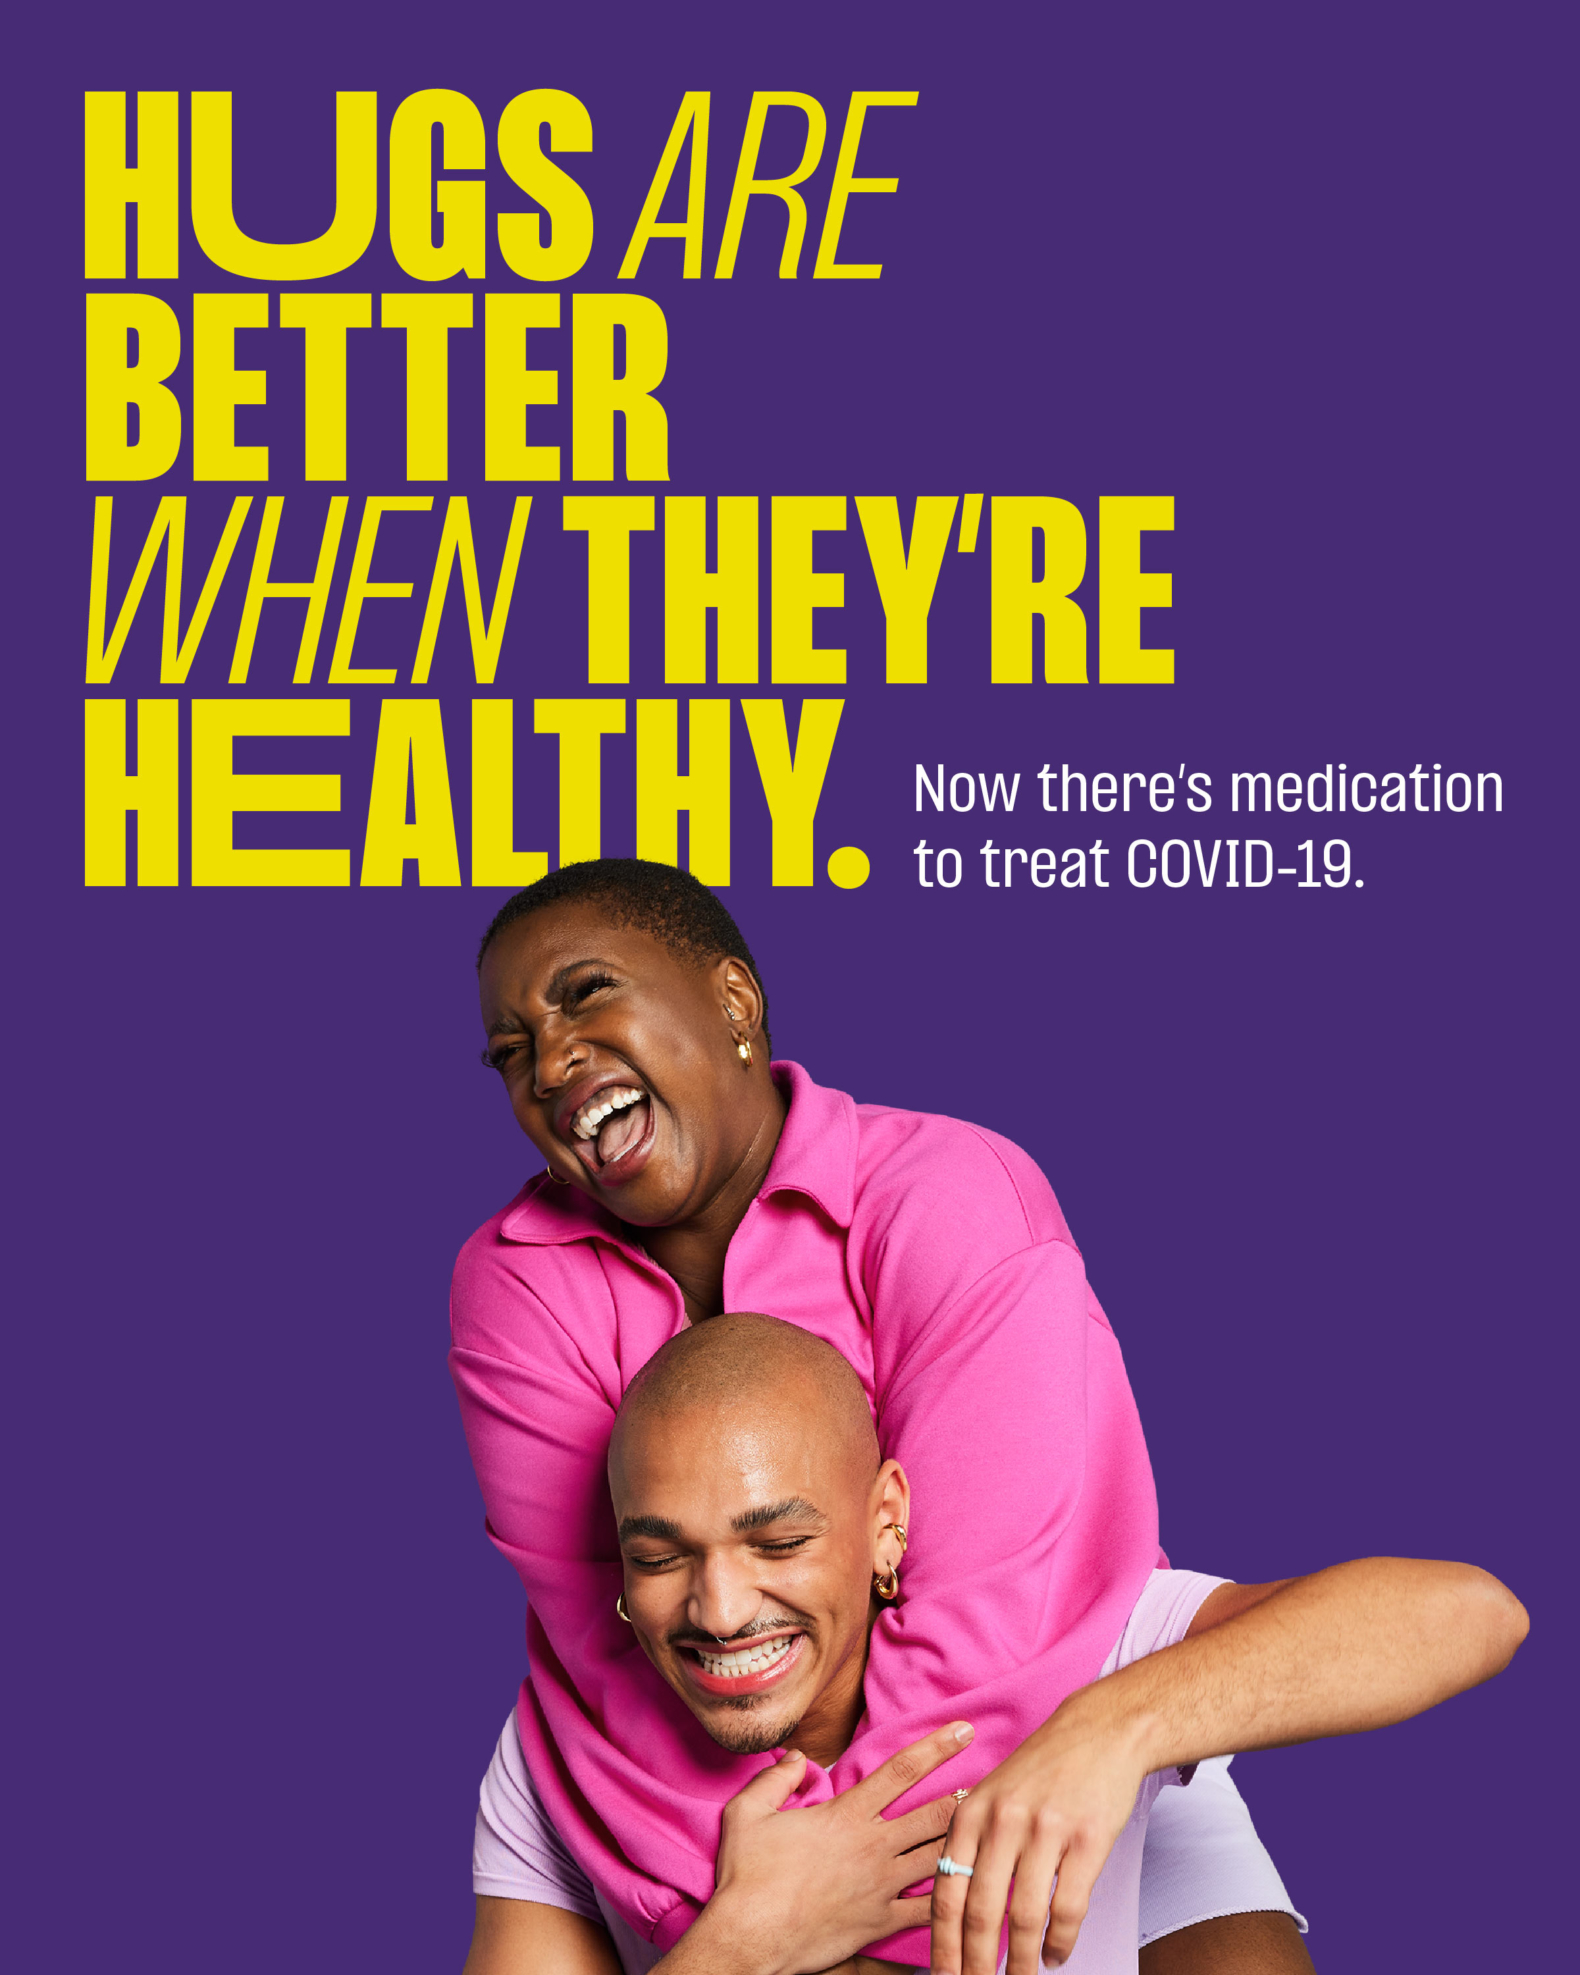 Vertical ad with dark purple background with bold yellow type on top left reading, “Hugs are better when they’re healthy.” Followed by small white type reading, “Now there’s medication to treat COVID-19.” A woman wearing a bright pink jumper has jumped on the shoulders of a man with a lavender t-shirt, both are smiling in a celebratory manner.